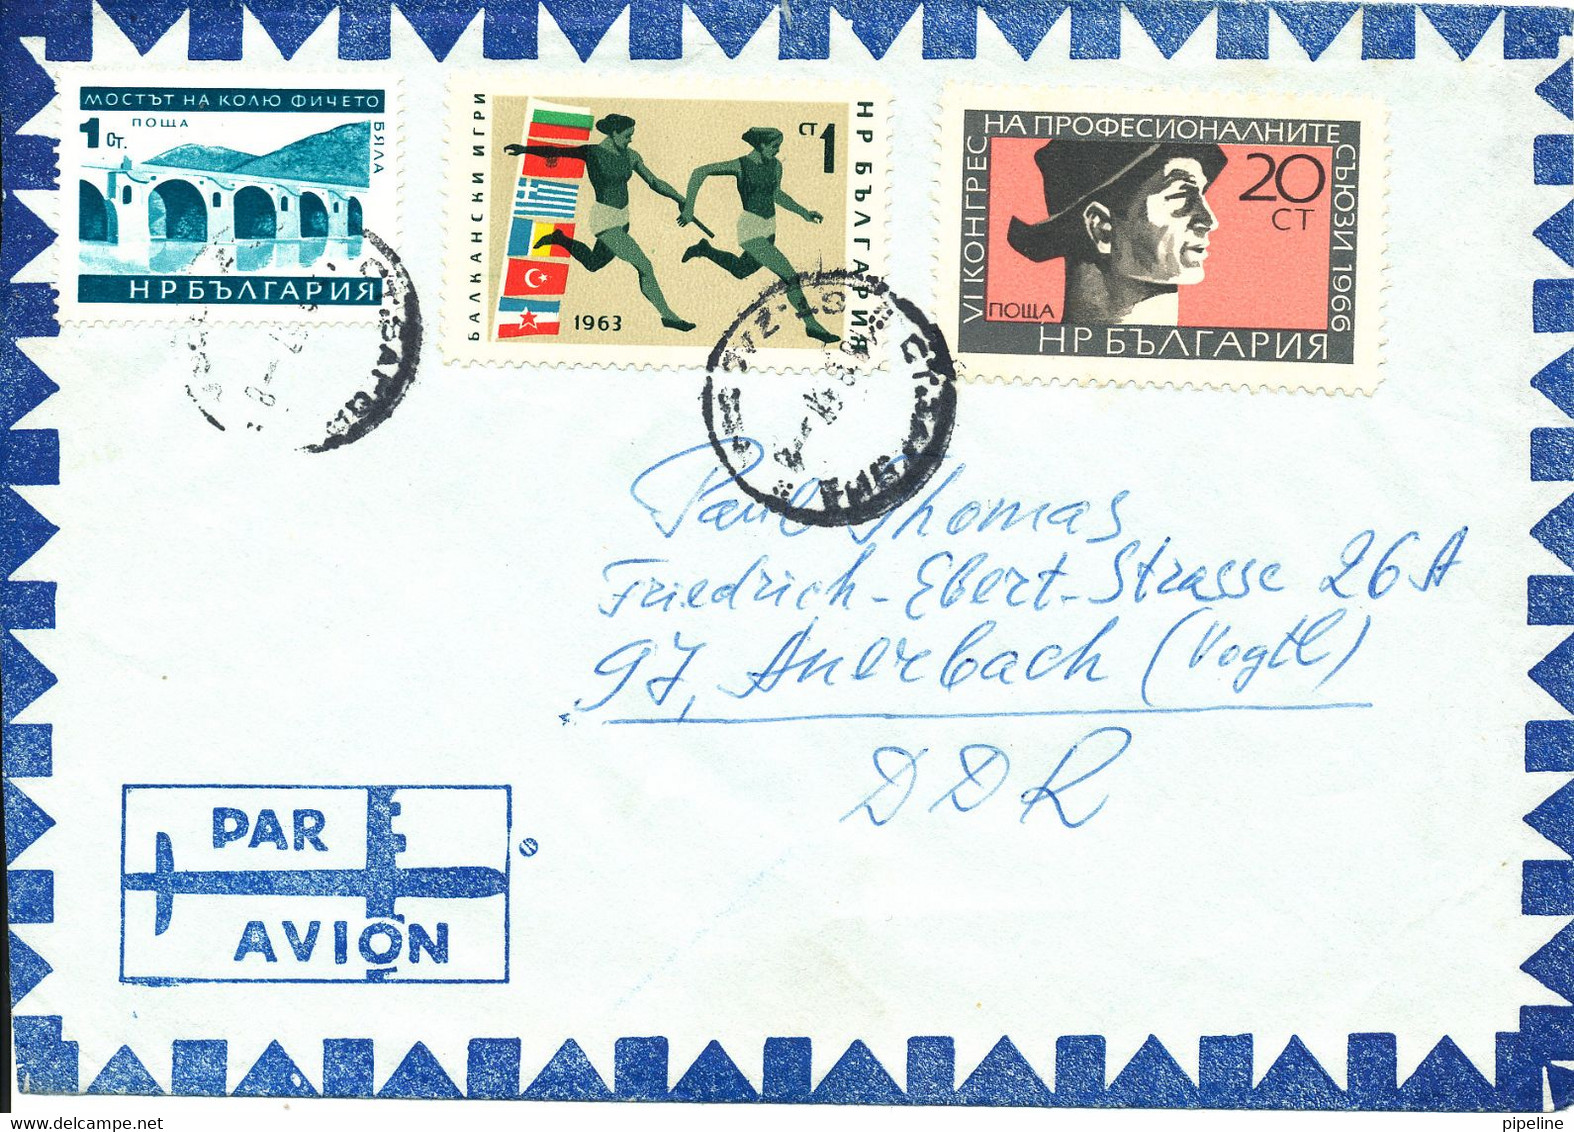 Bulgaria Air Cover Sent To Germany DDR 18-8-1967 Topic Stamps - Airmail